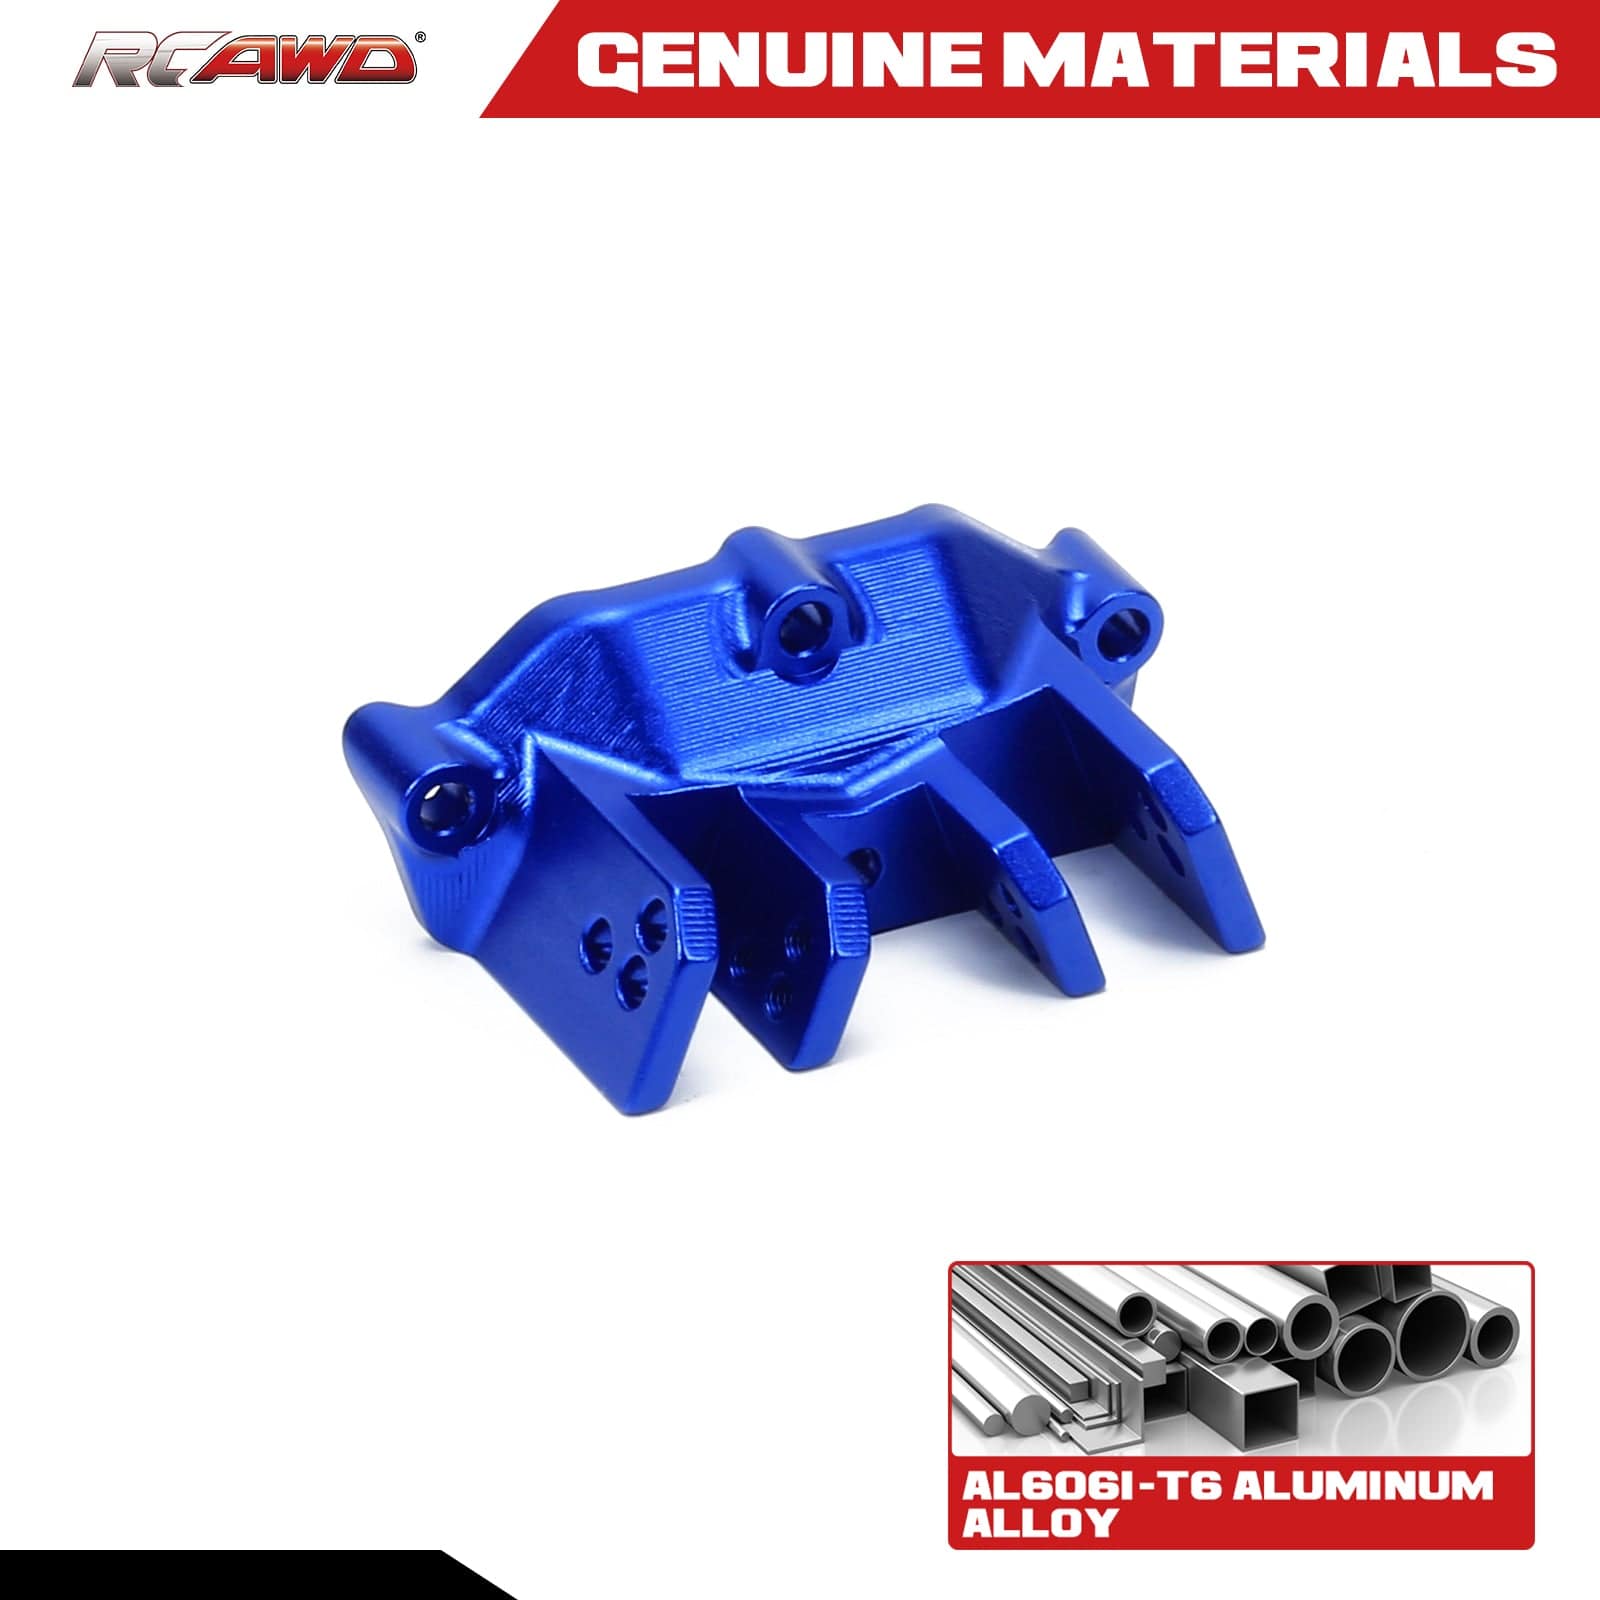 RCAWD Aluminum alloy Axle Housing Upper Track Rod Mount  for 1-10 Losi Baja Rey Hammer Rey U4 RC car Upgrded part